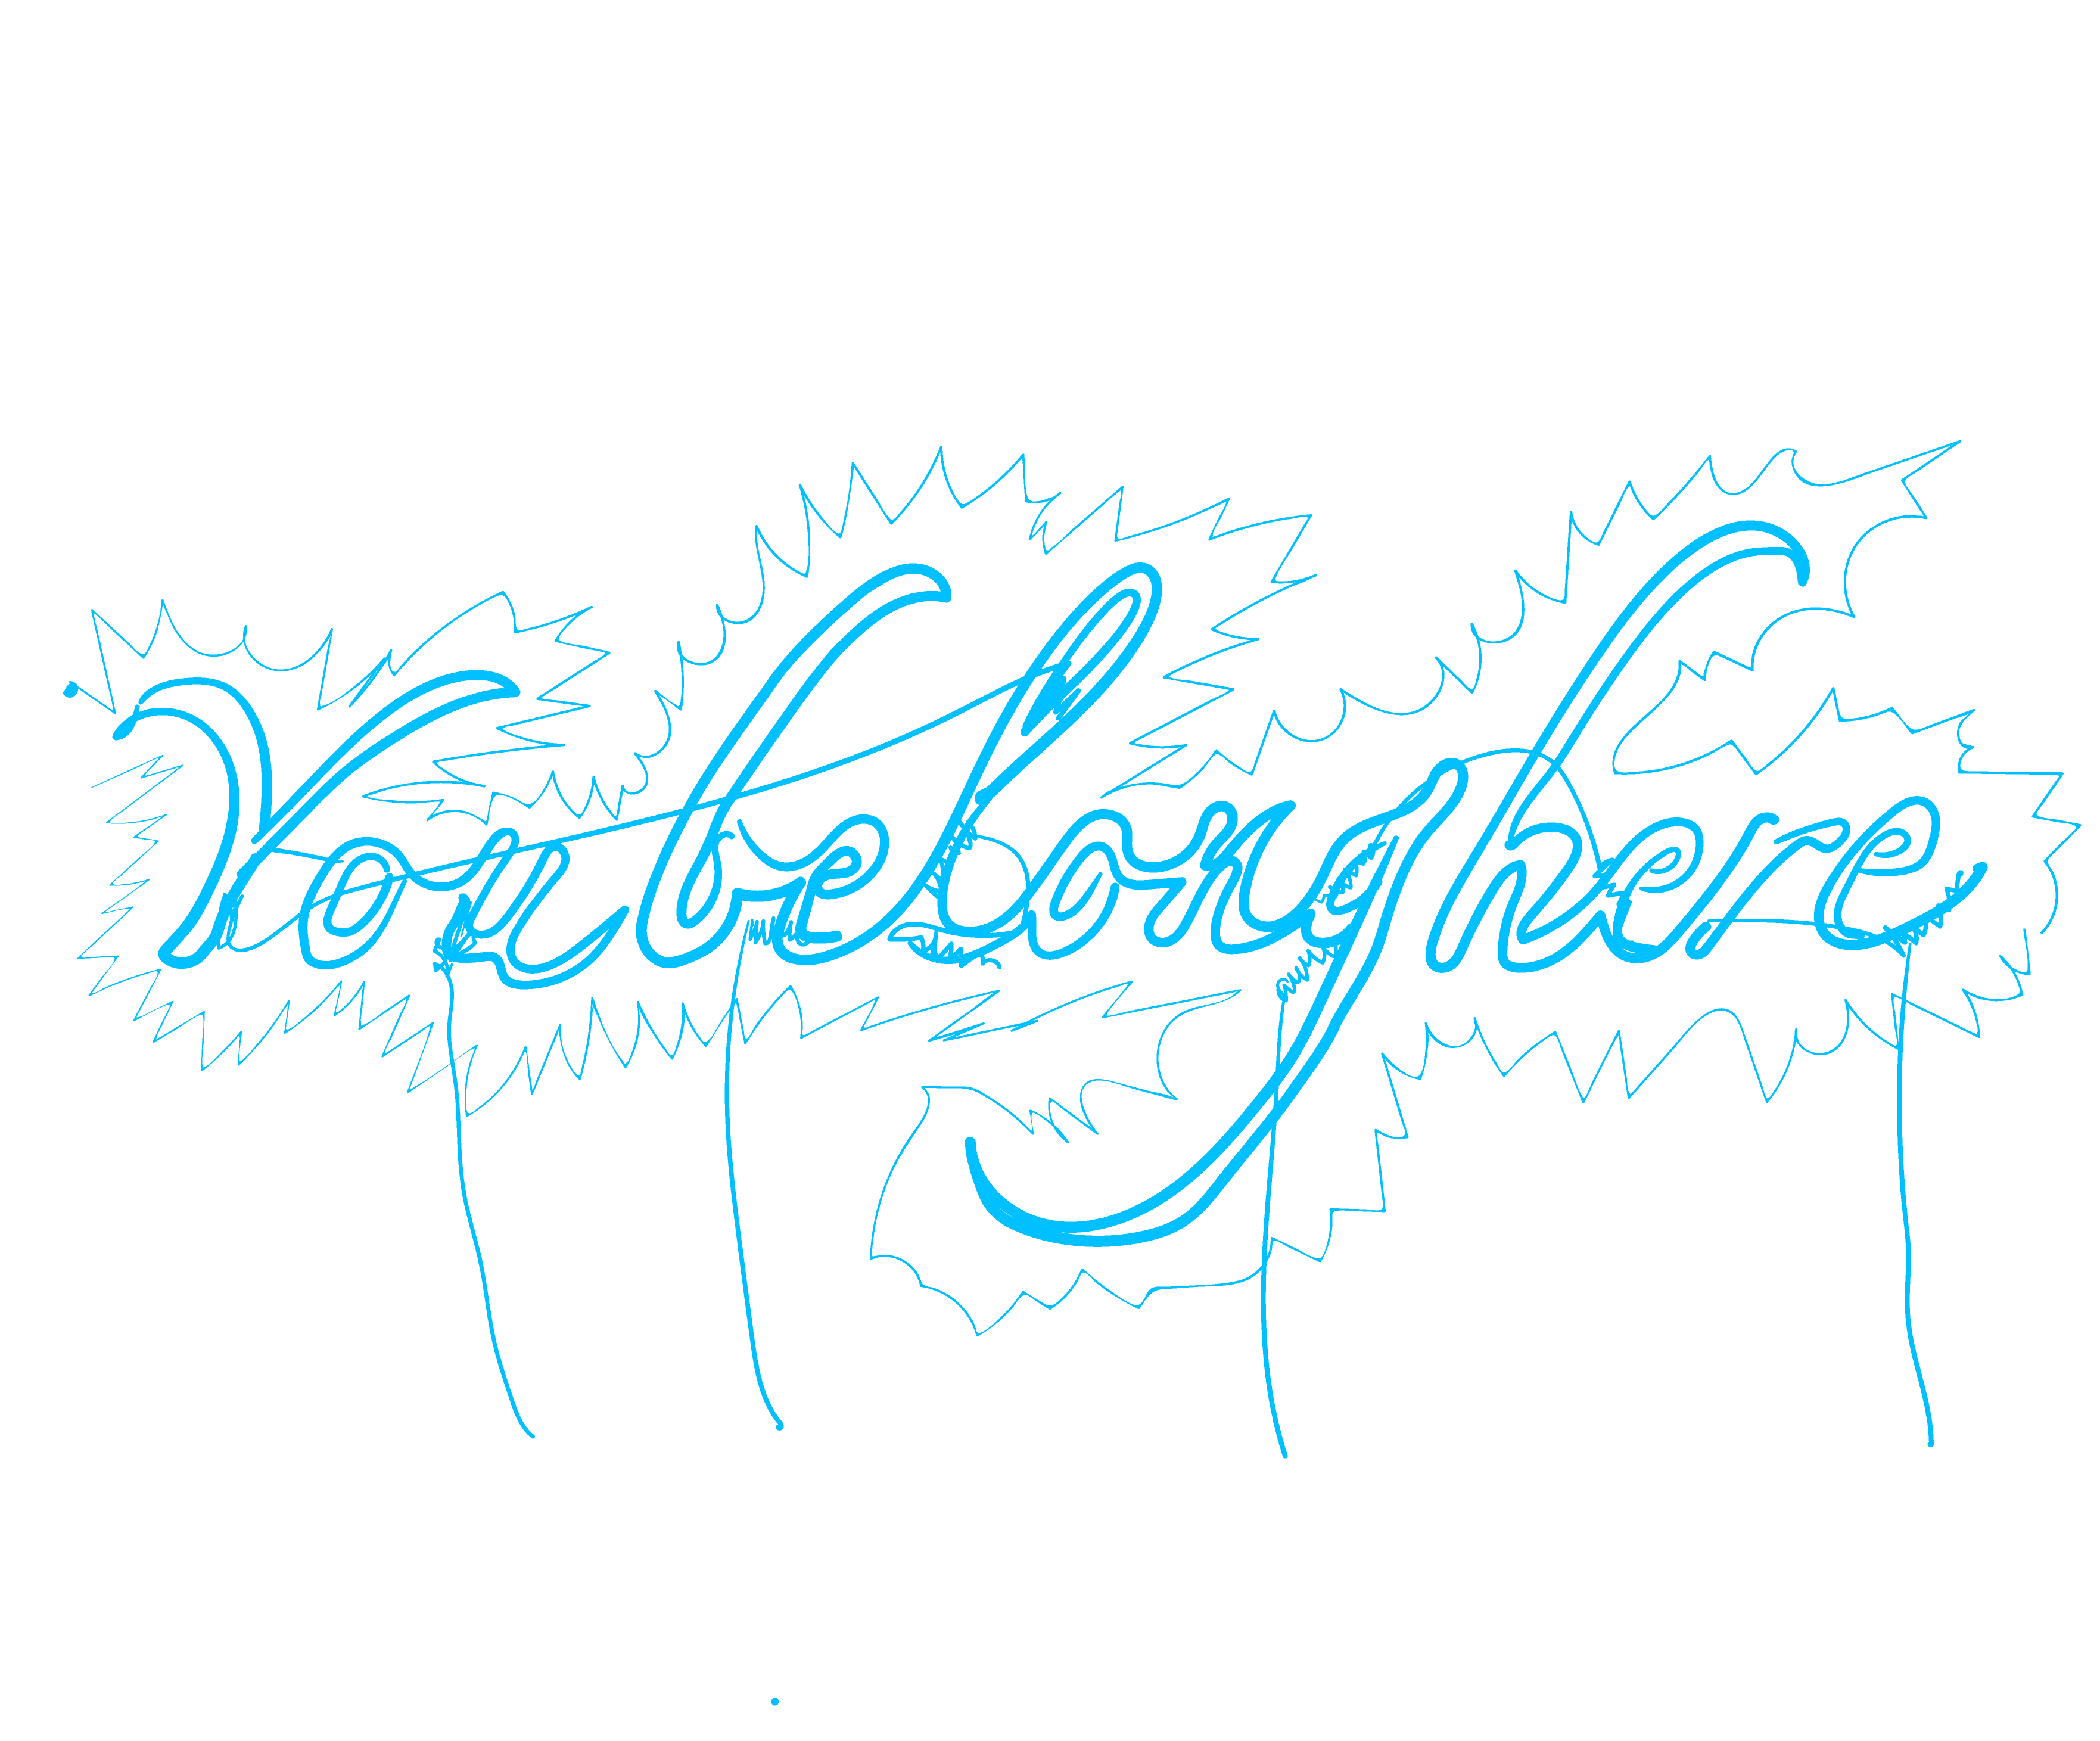 line drawing of Tavares Strachan's neon lighting piece that reads You belong here